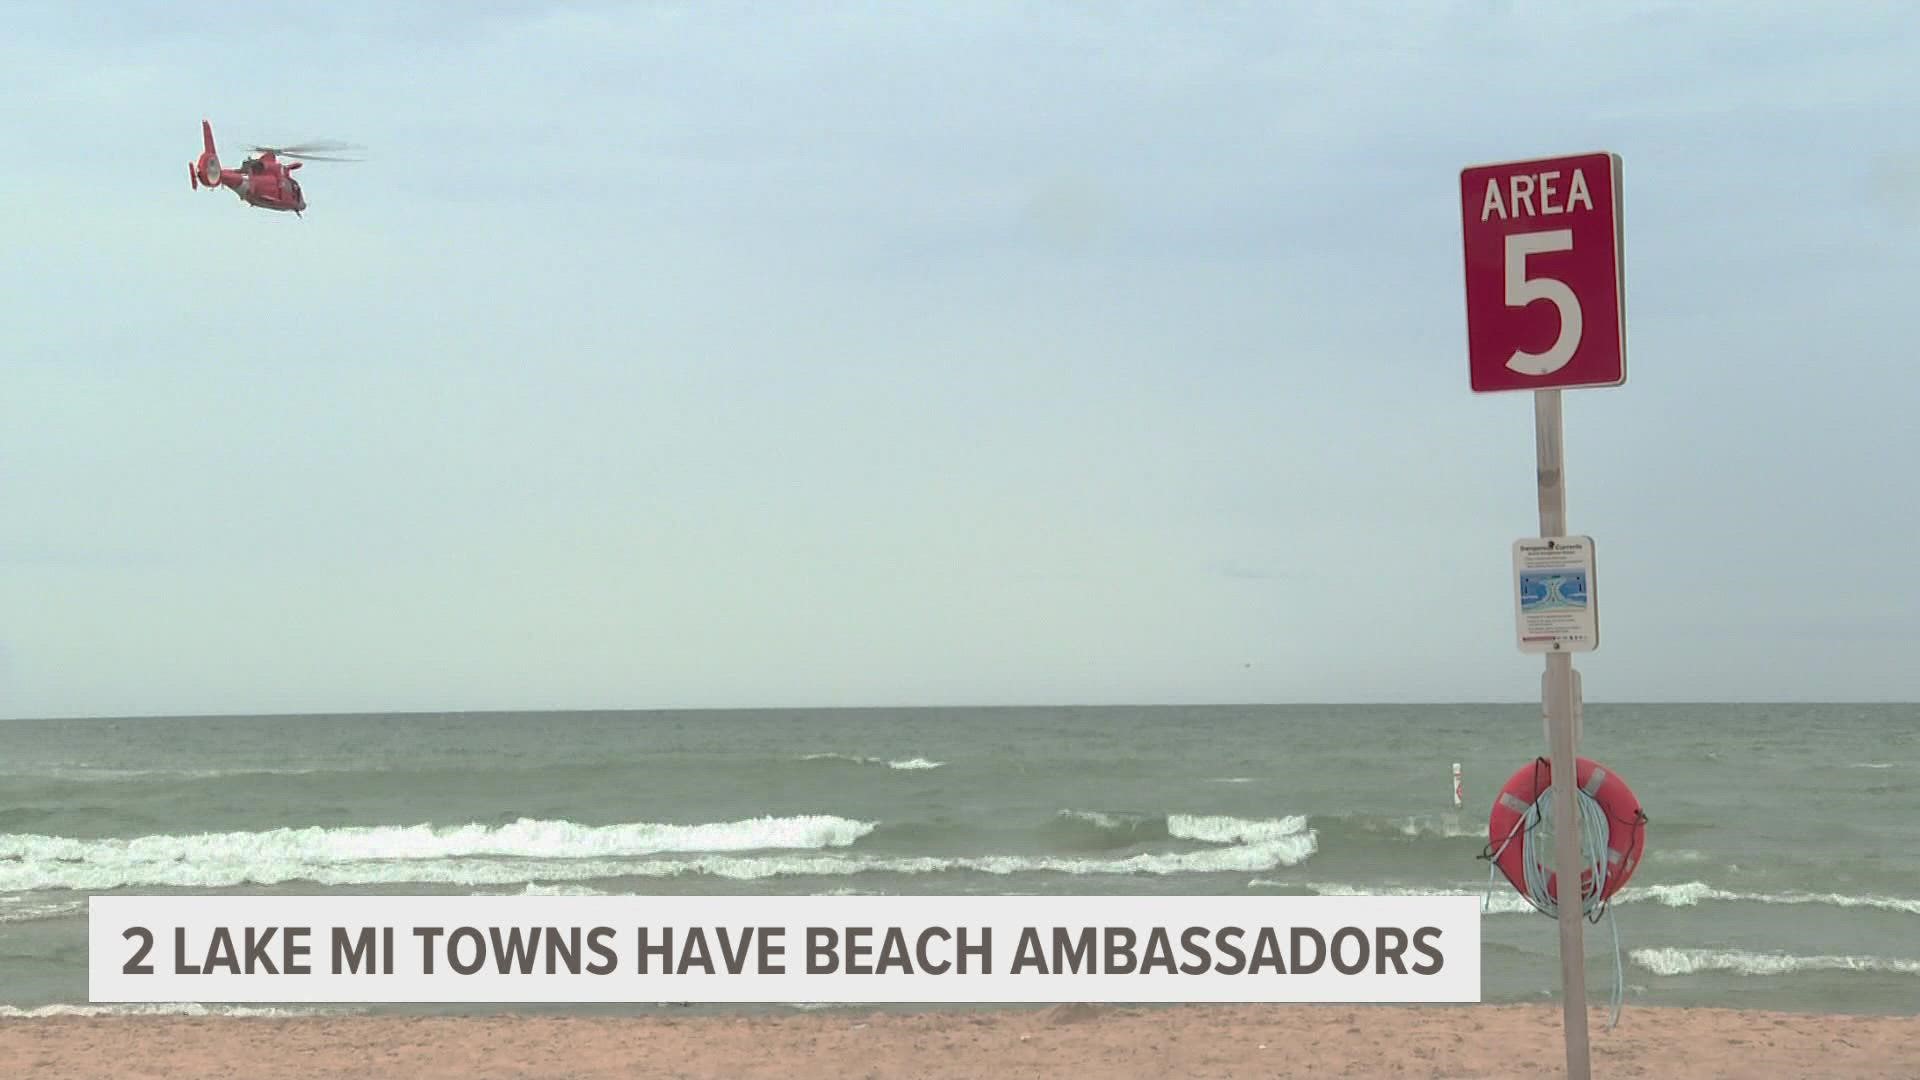 Two communities affected by drownings are taking a new approach to keep people safe at the beach.